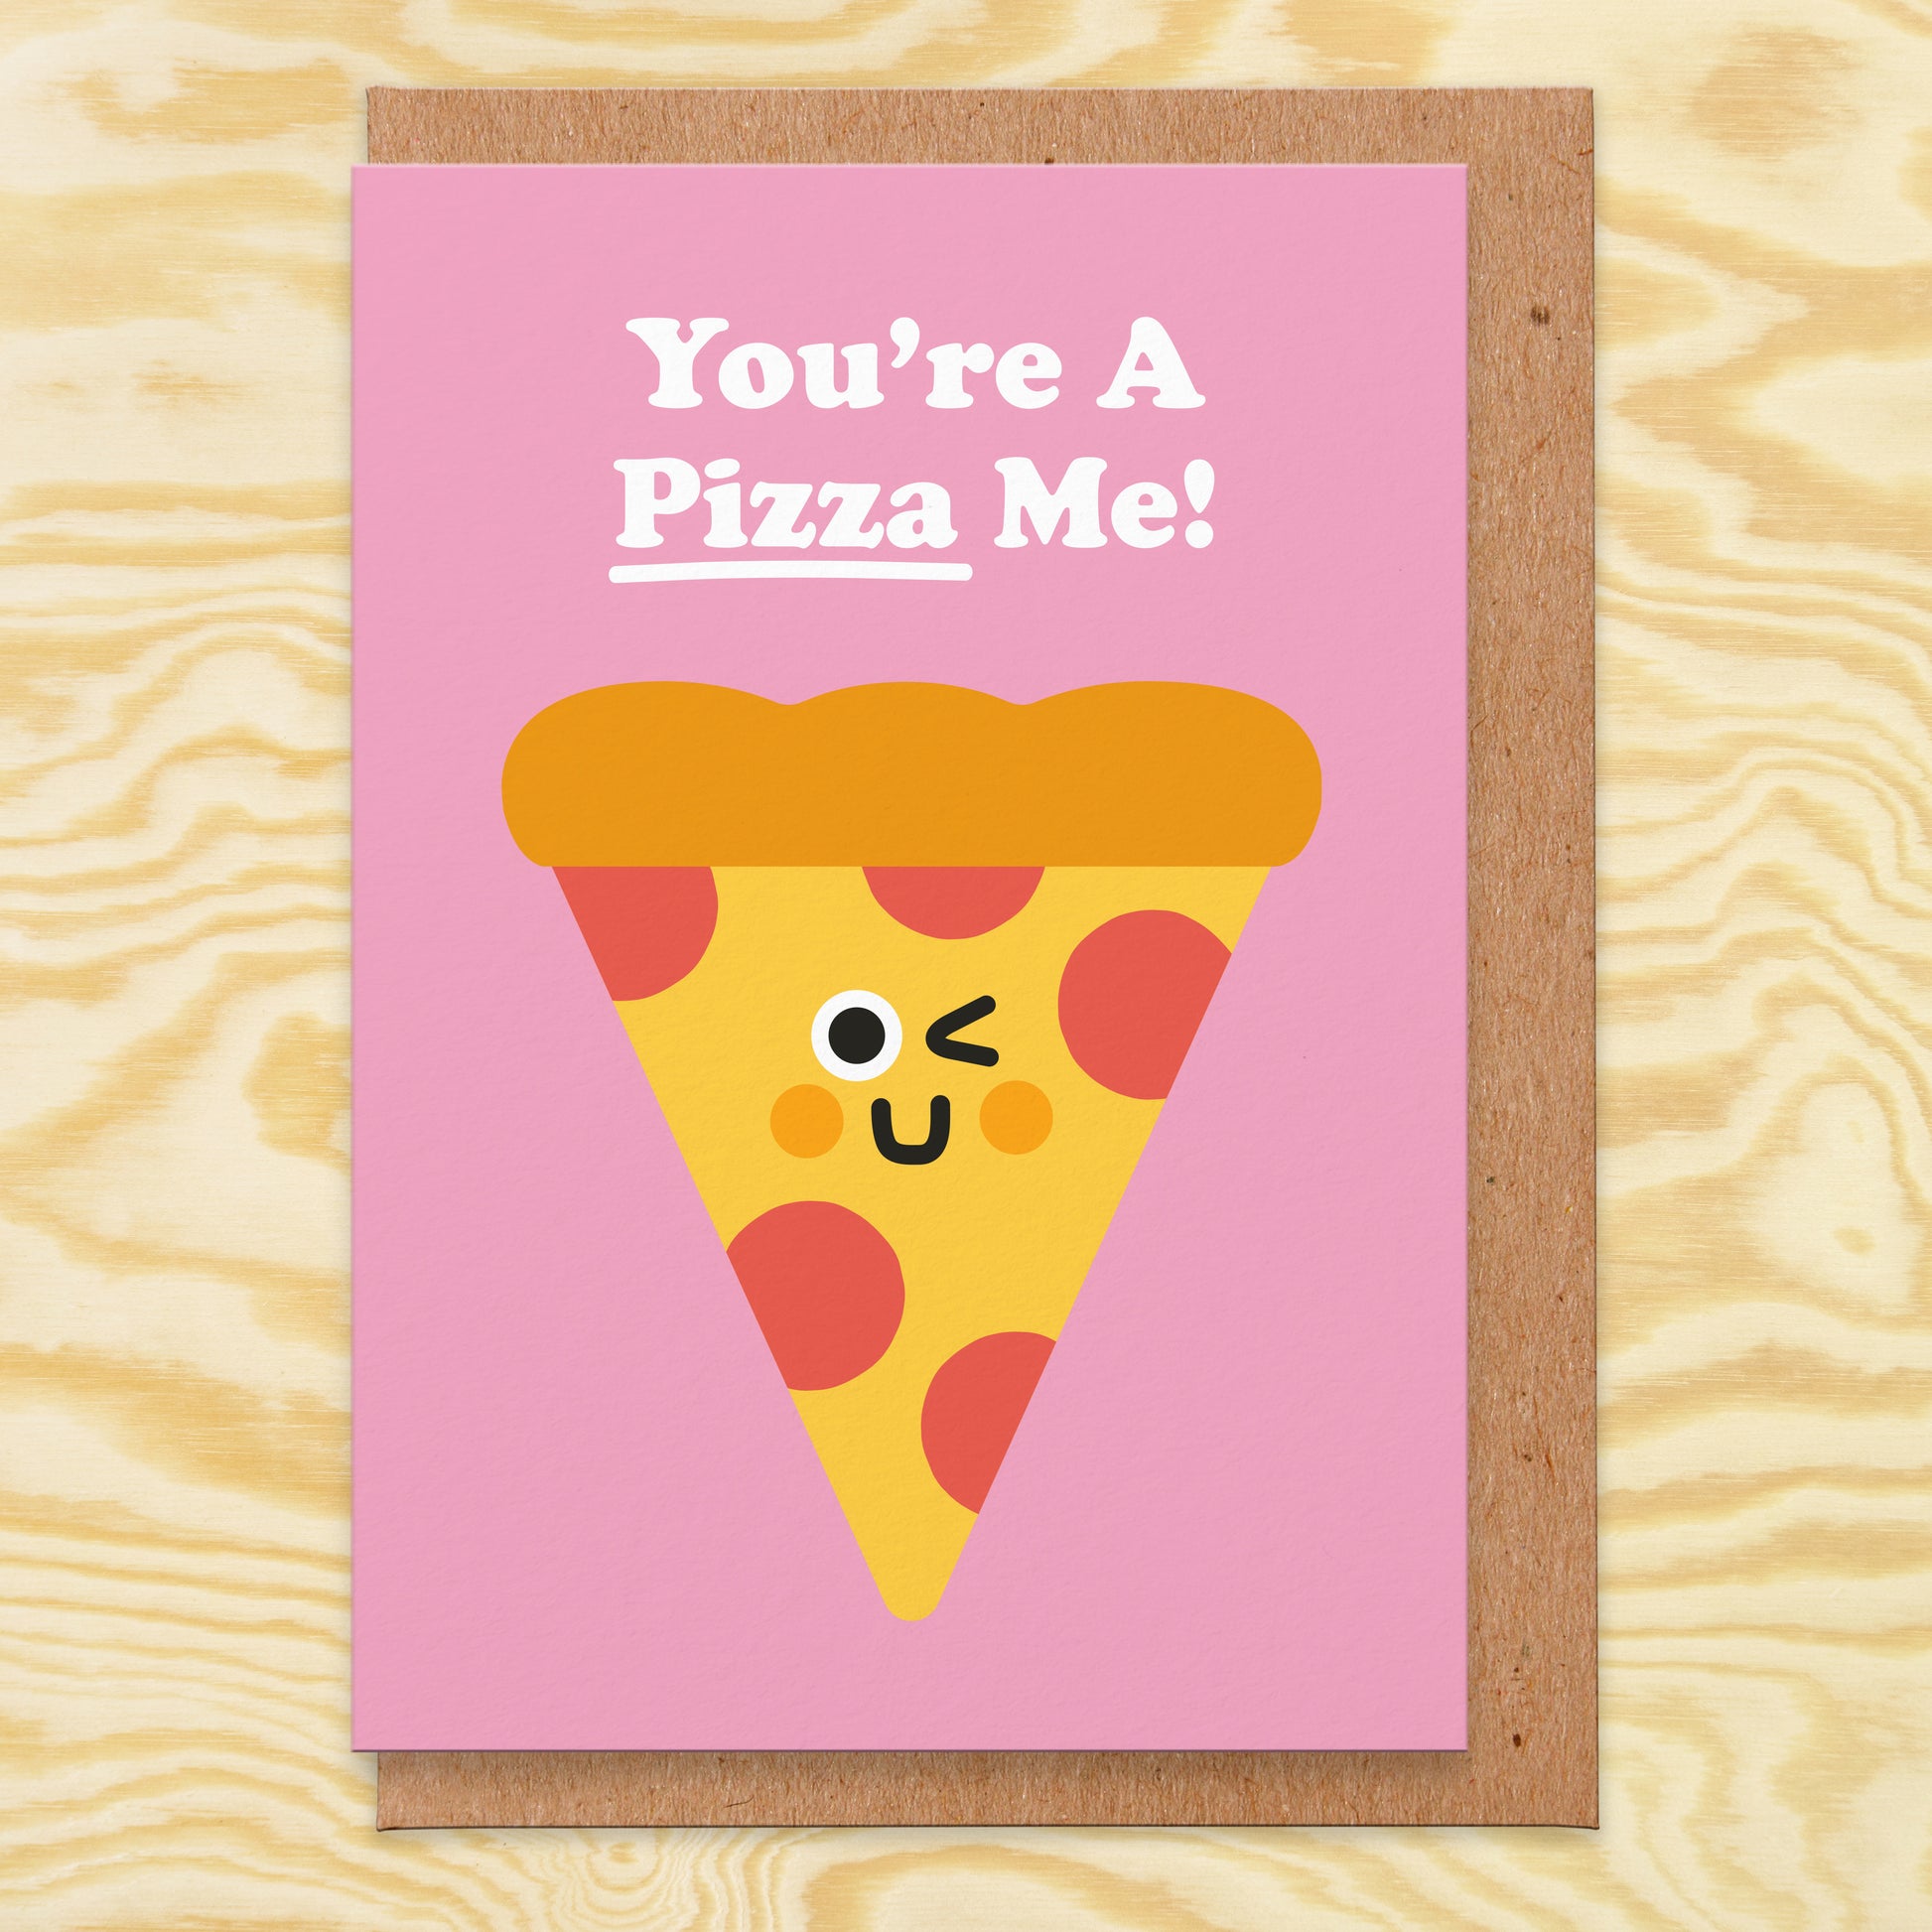 Valentine's Day card with an illustration of a piece of pizza with winking face and reads You're A Pizza Me!